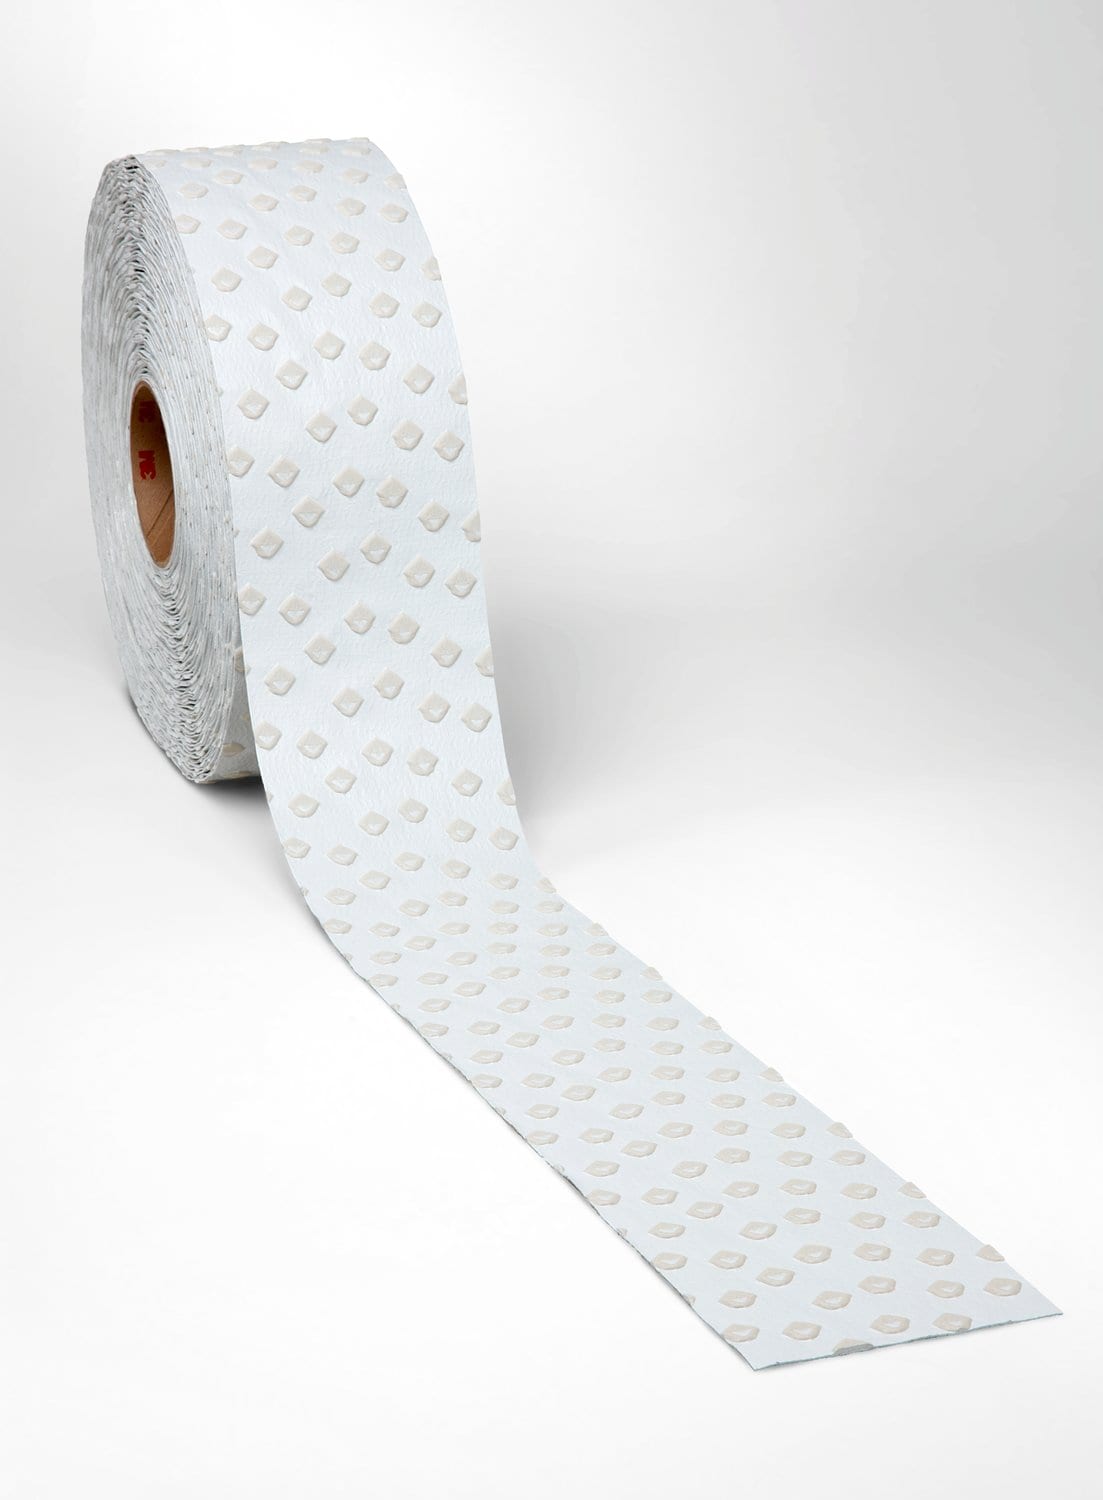 7100319172 - 3M Stamark Removable Pavement Marking Tape A710, White, IL Only, 8 in x 120 yd